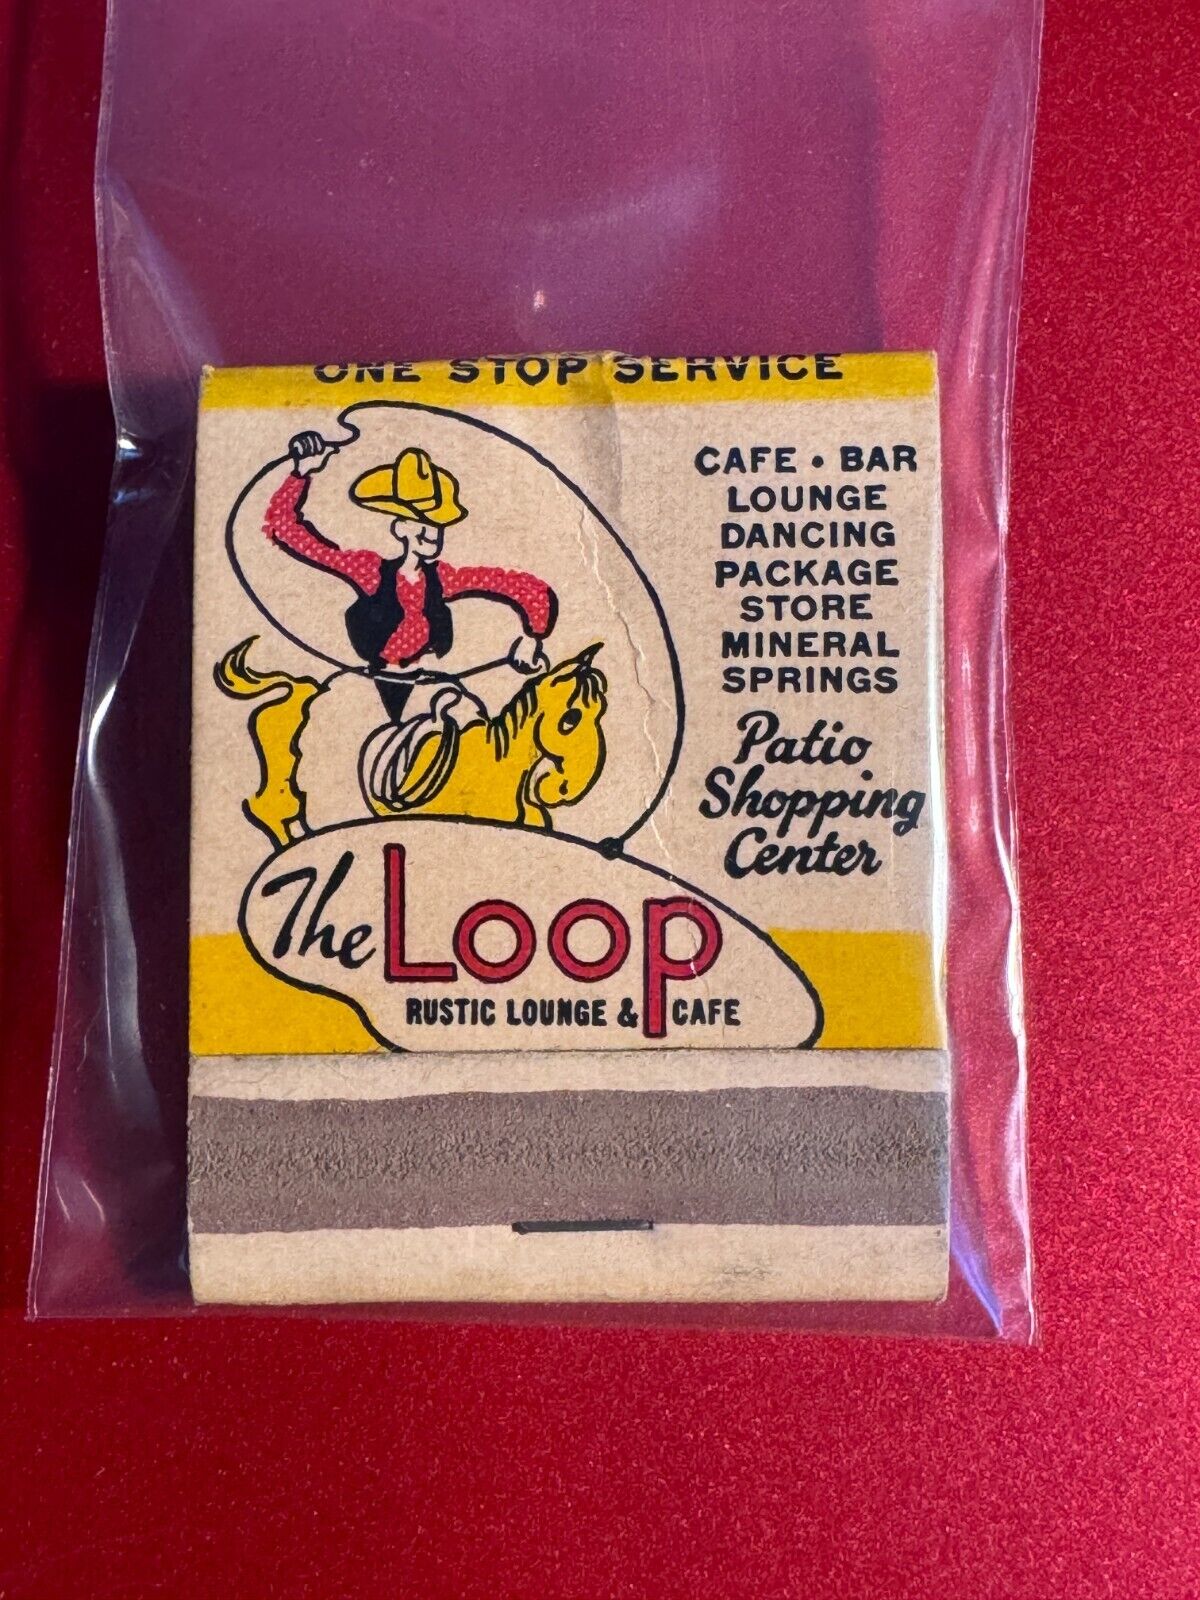 MATCHBOOK - THE LOOP RUSTIC LOUNGE & CAFE - MANITOU SPRINGS - UNSTRUCK